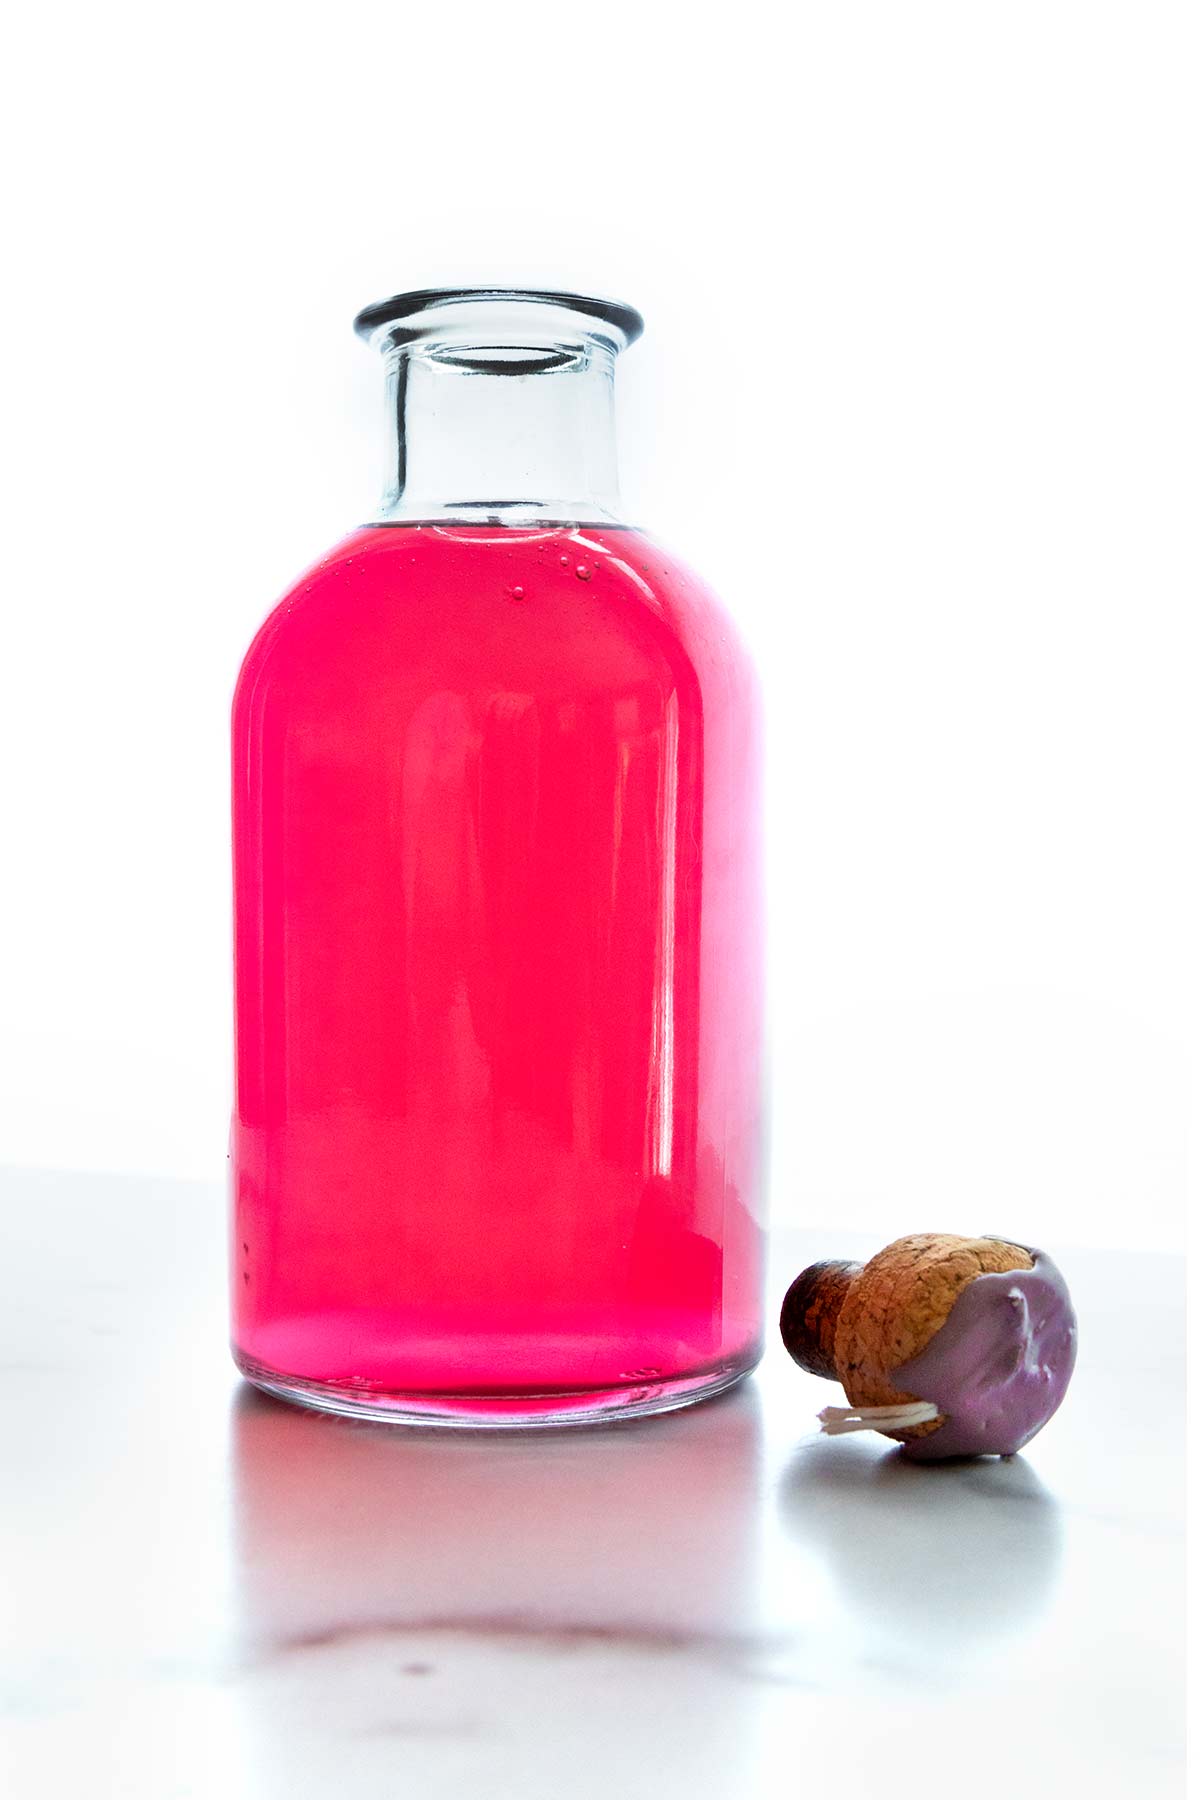 A glass bottle with pink chive blossom vinegar in it, a cork nearby.